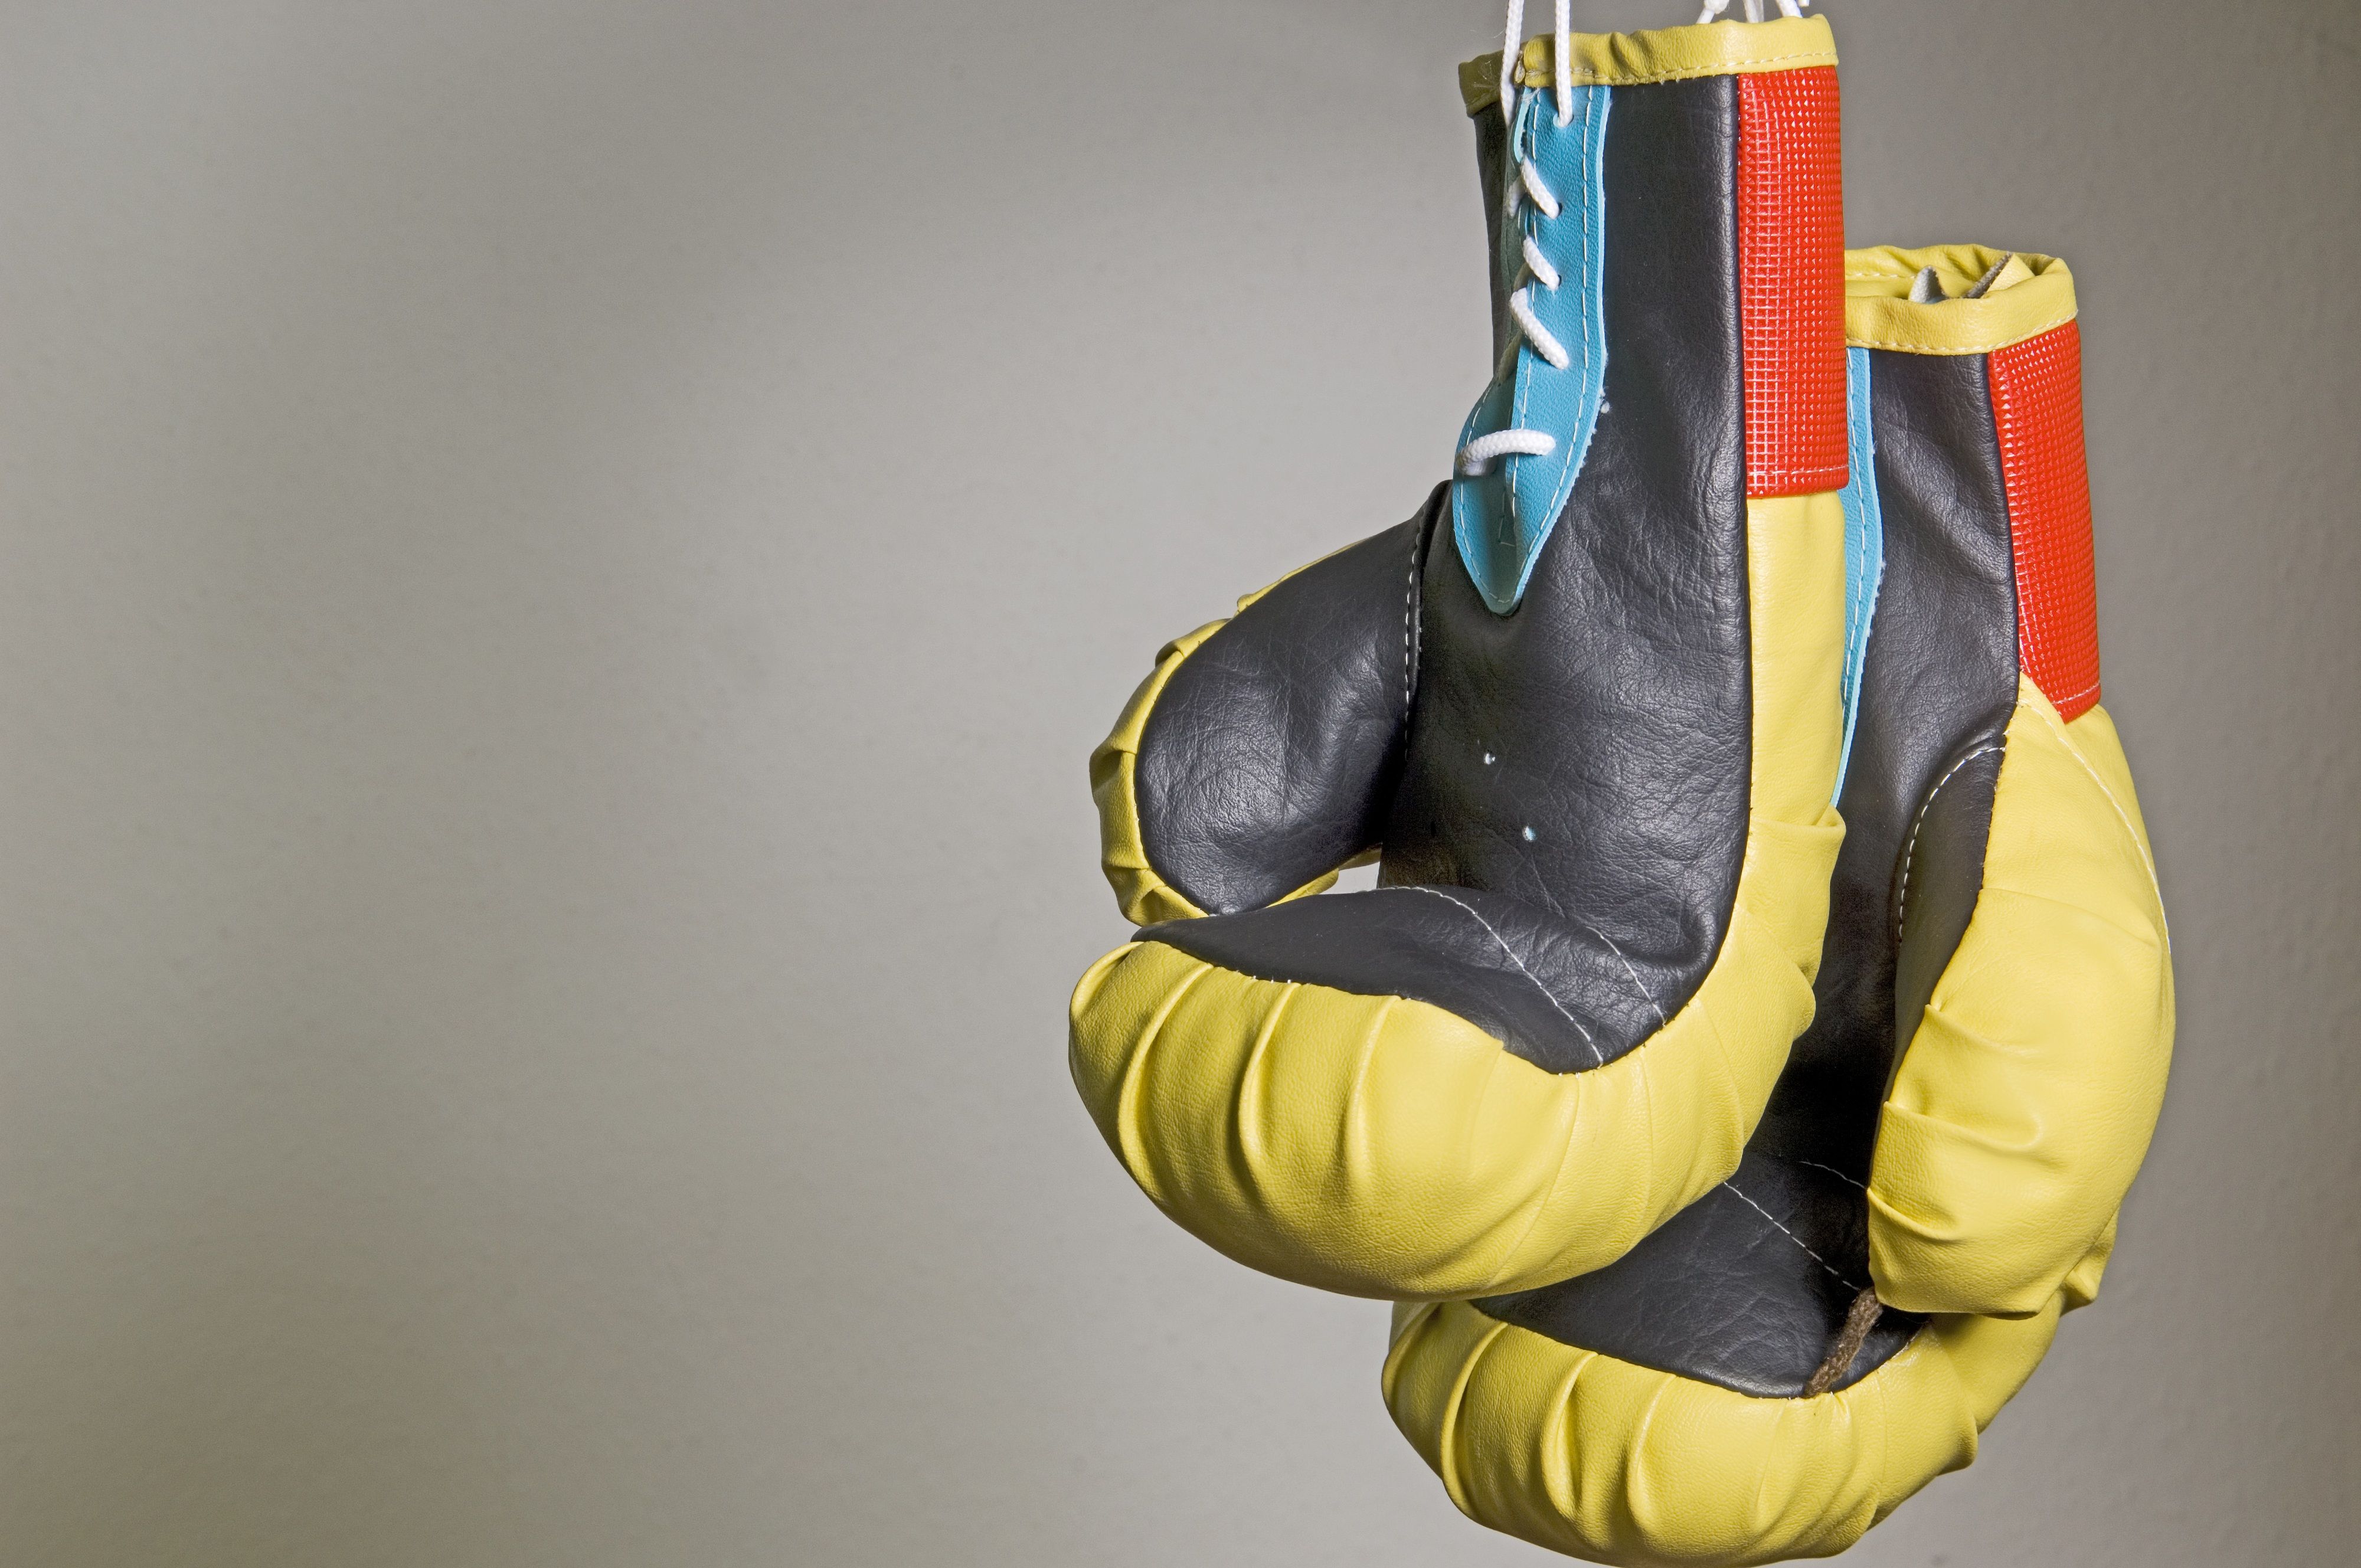 Photo of hanging boxing gloves 4k Ultra HD Wallpaper. Background